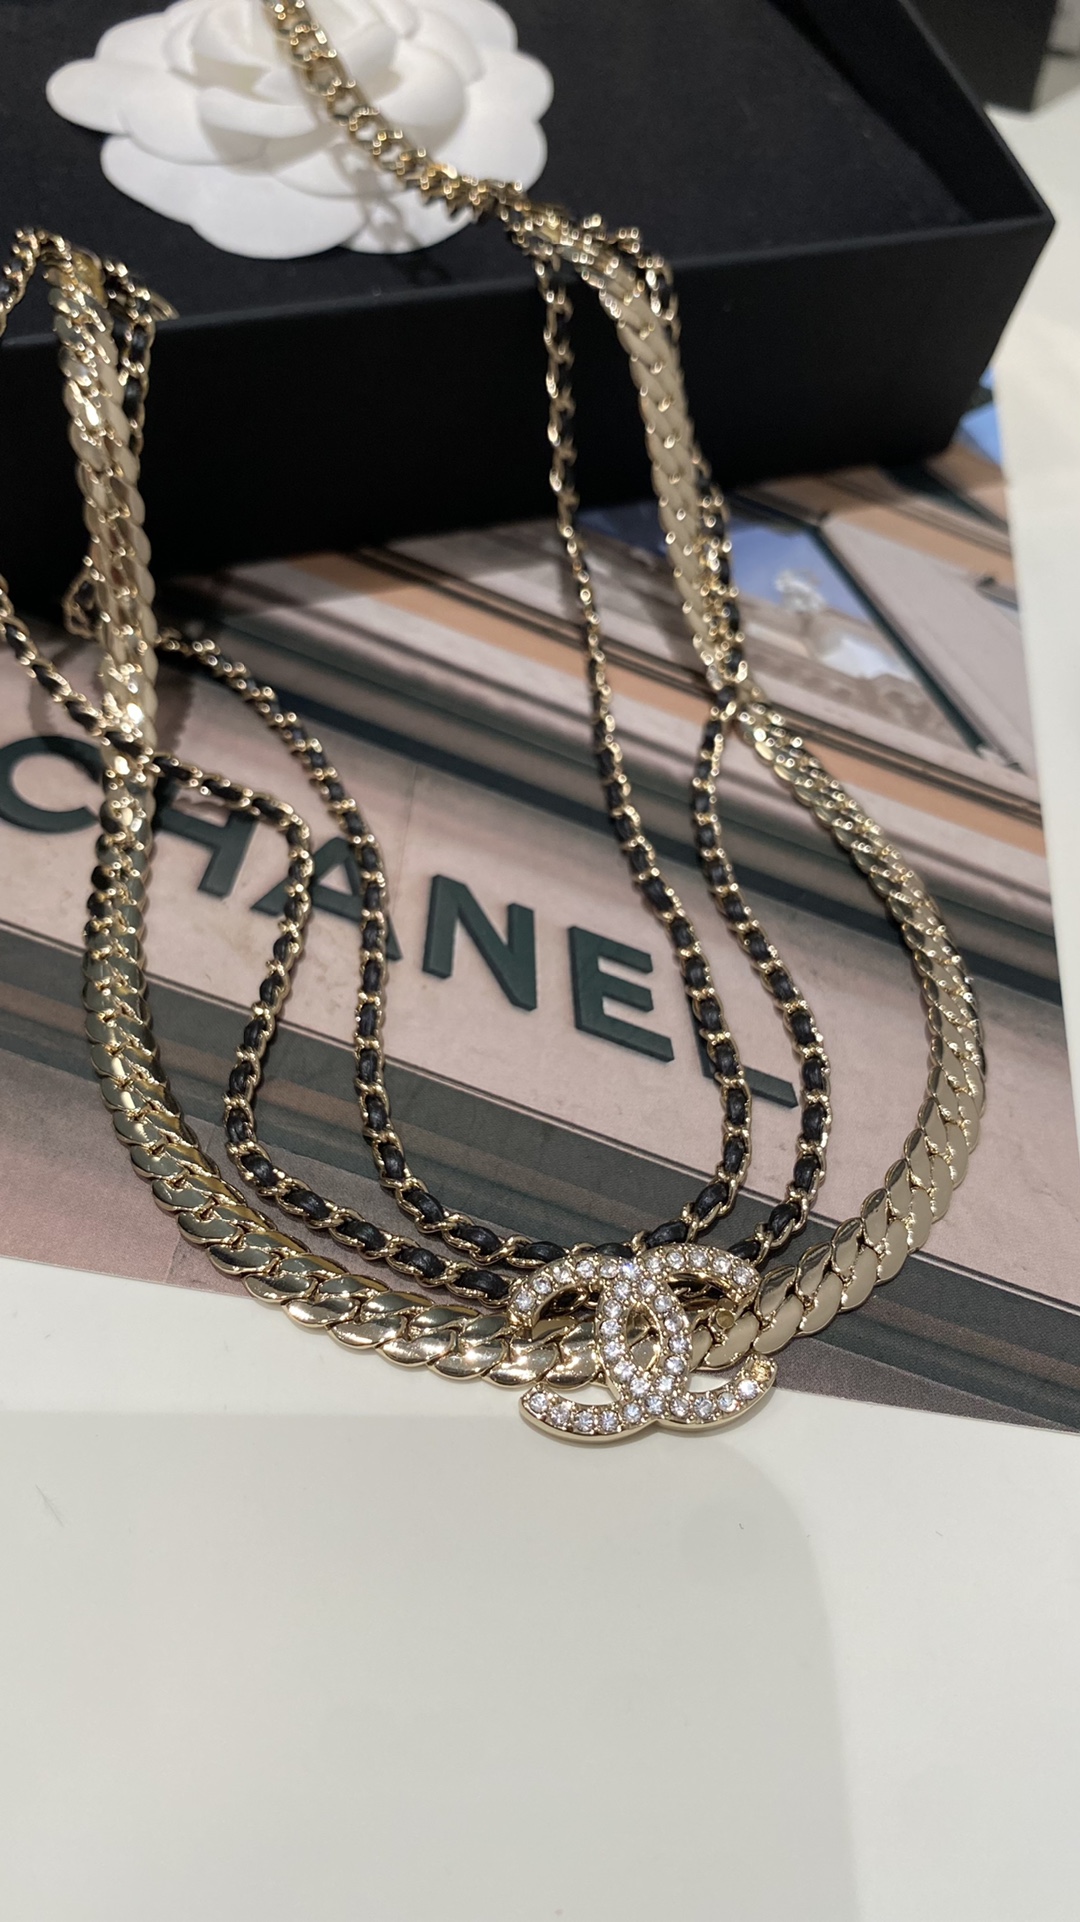 Chanel Jewelry Necklaces & Pendants sell Online